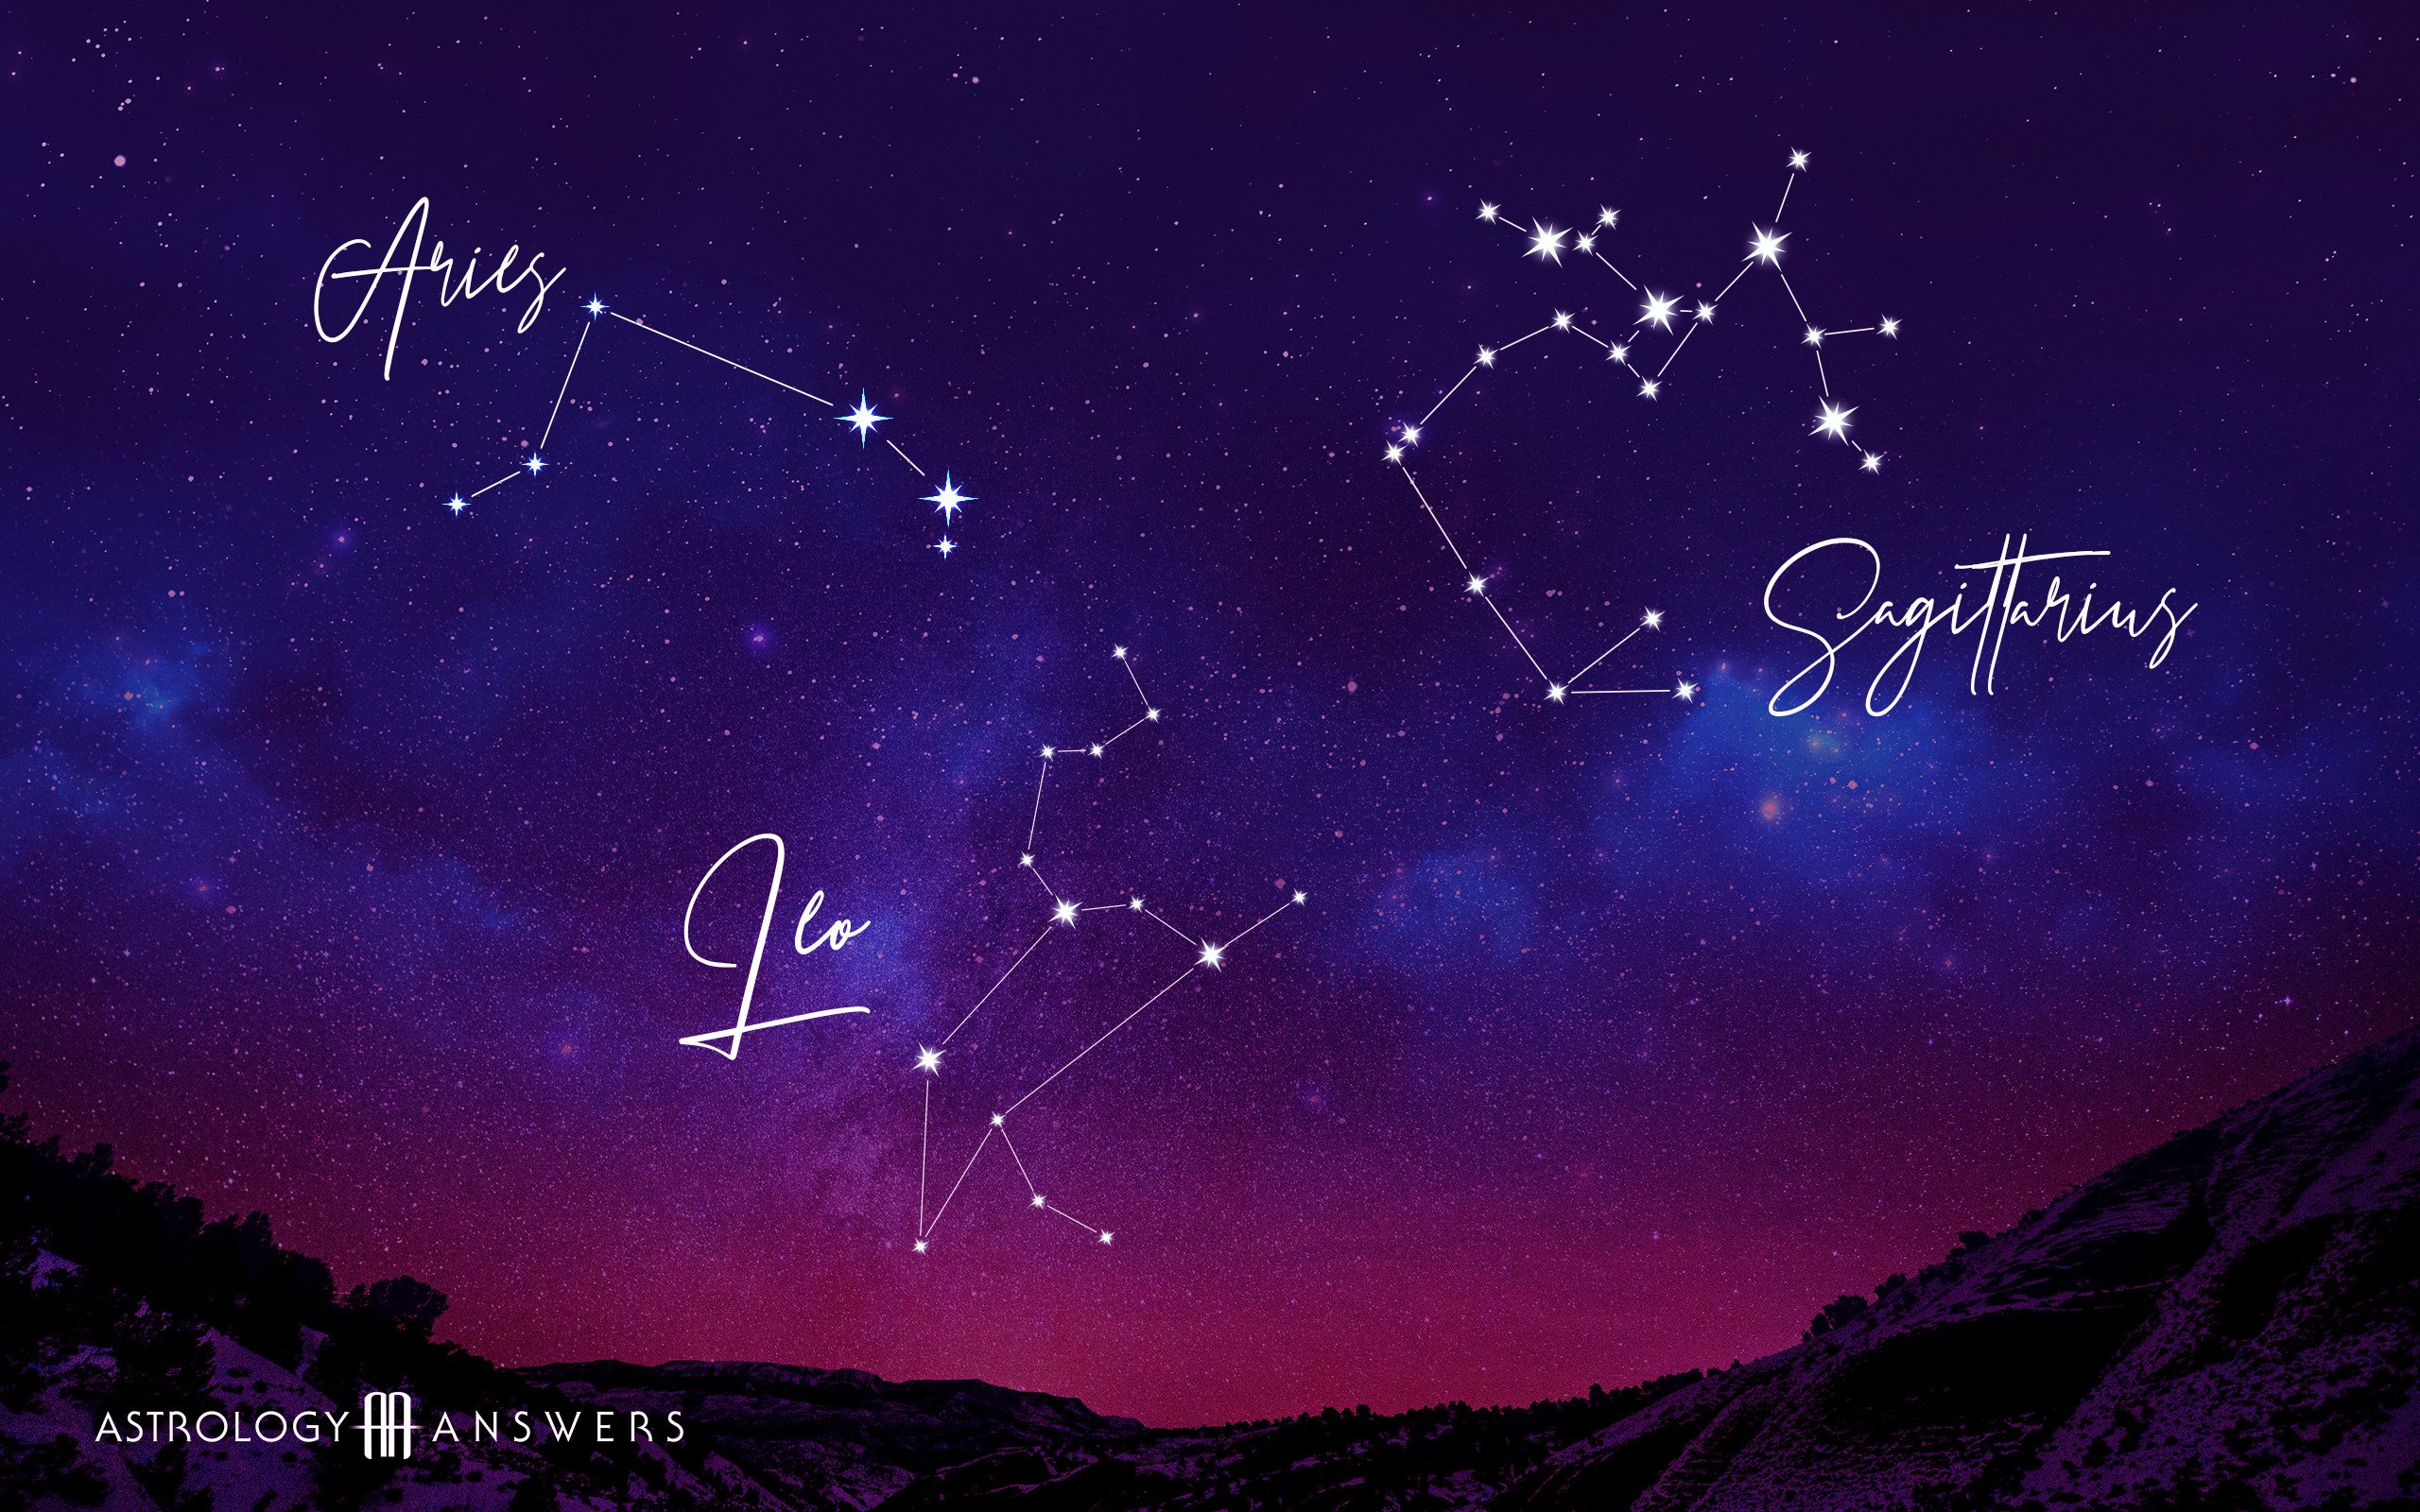 The Mythology of the Zodiac: The Fire Constellations (Free Wallpaper!)